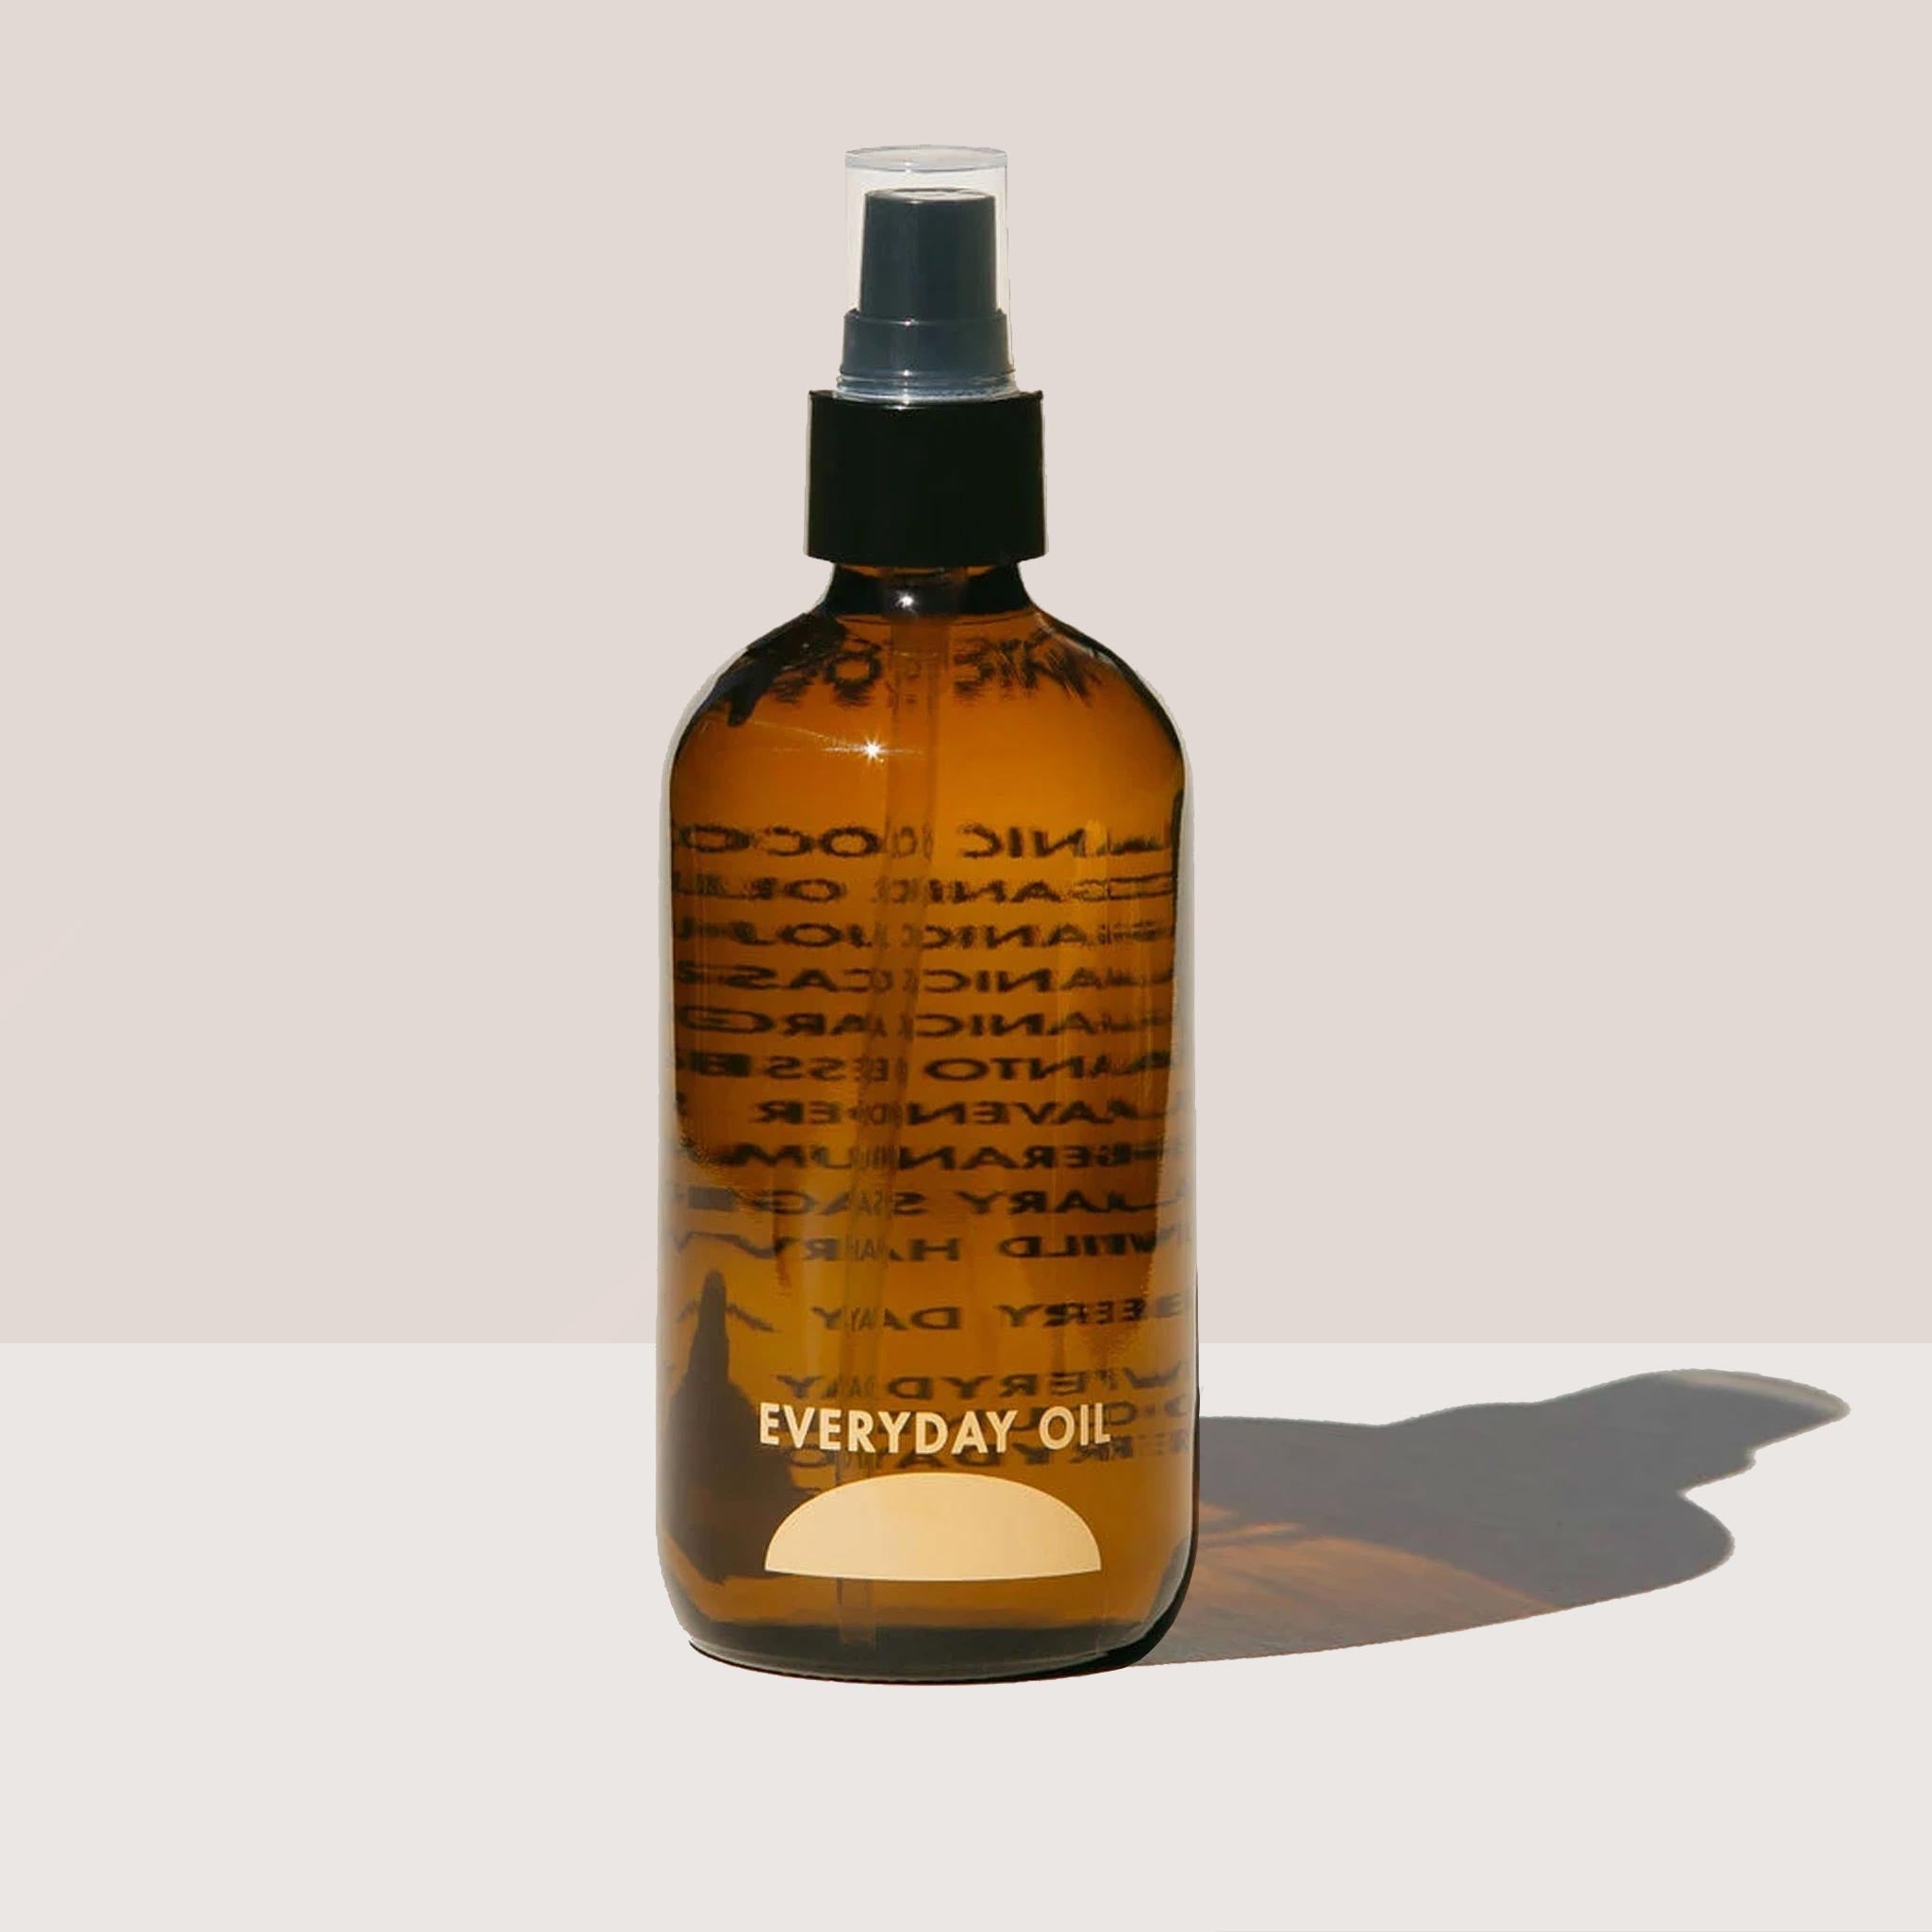 Everyday Oil - 8oz Bottle, available at LCD.